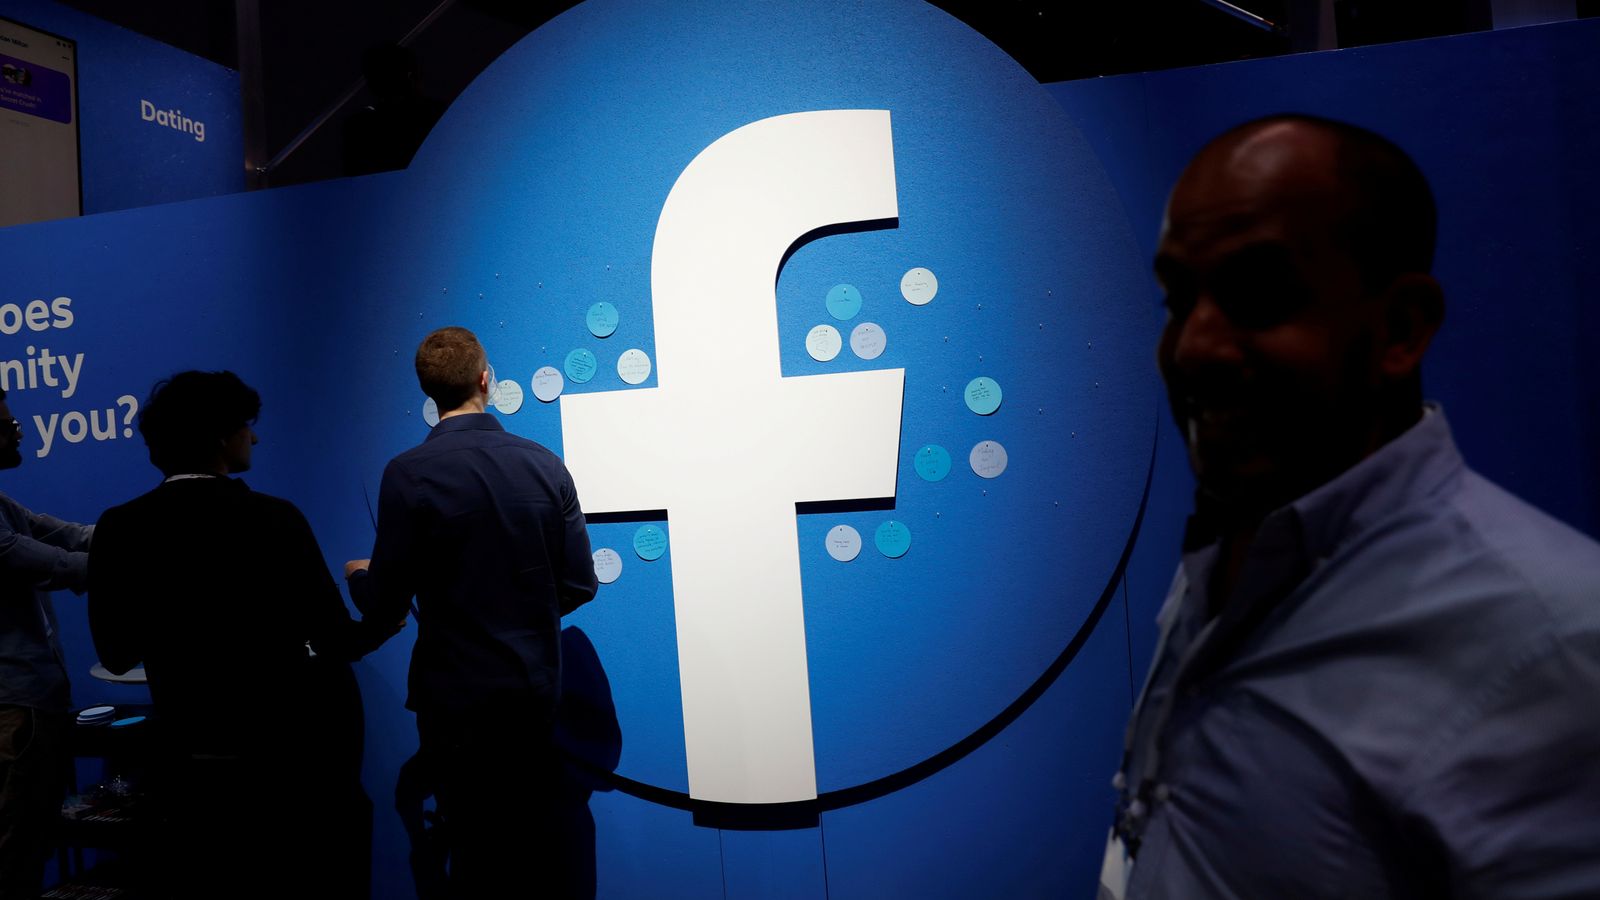 Amsterdam Dutch court rejects Facebook appeal to dismiss privacy lawsuit